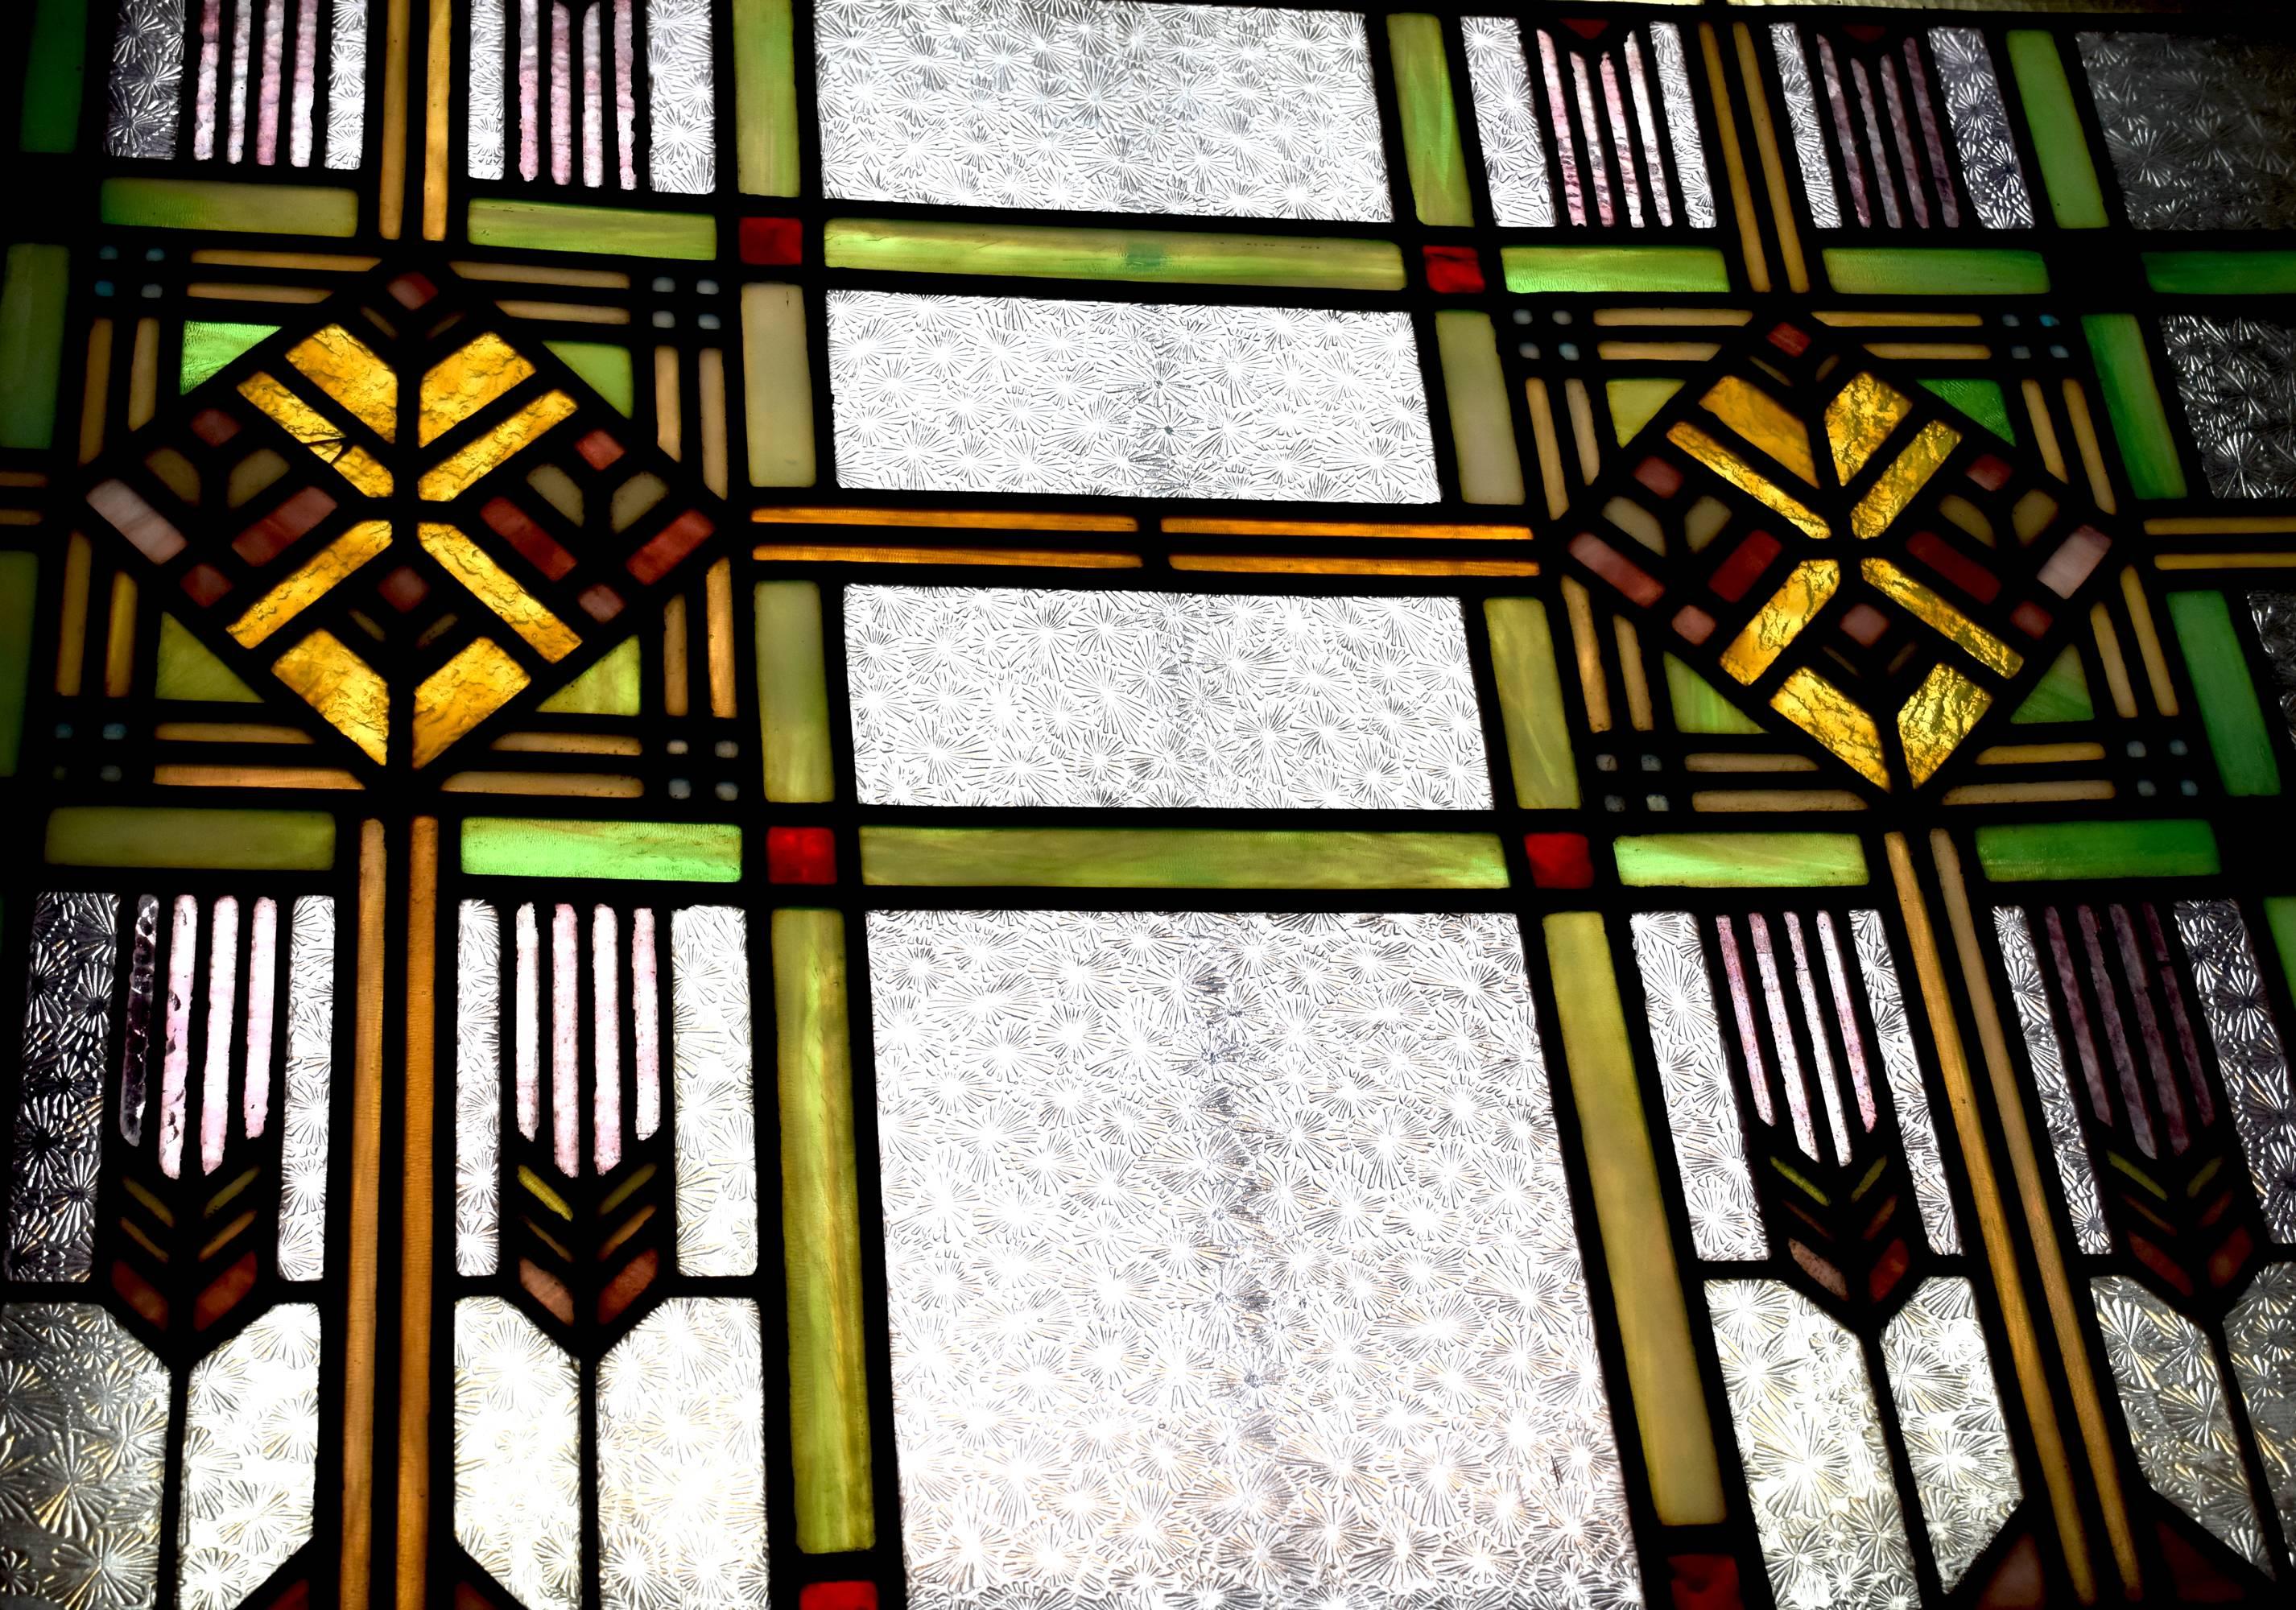 This window is a gorgeous example of the Prairie style, popular in the early 20th century and characterized by strong, defined lines and geometric shapes inspired by nature.

The second photo shows the window with natural light shining through.